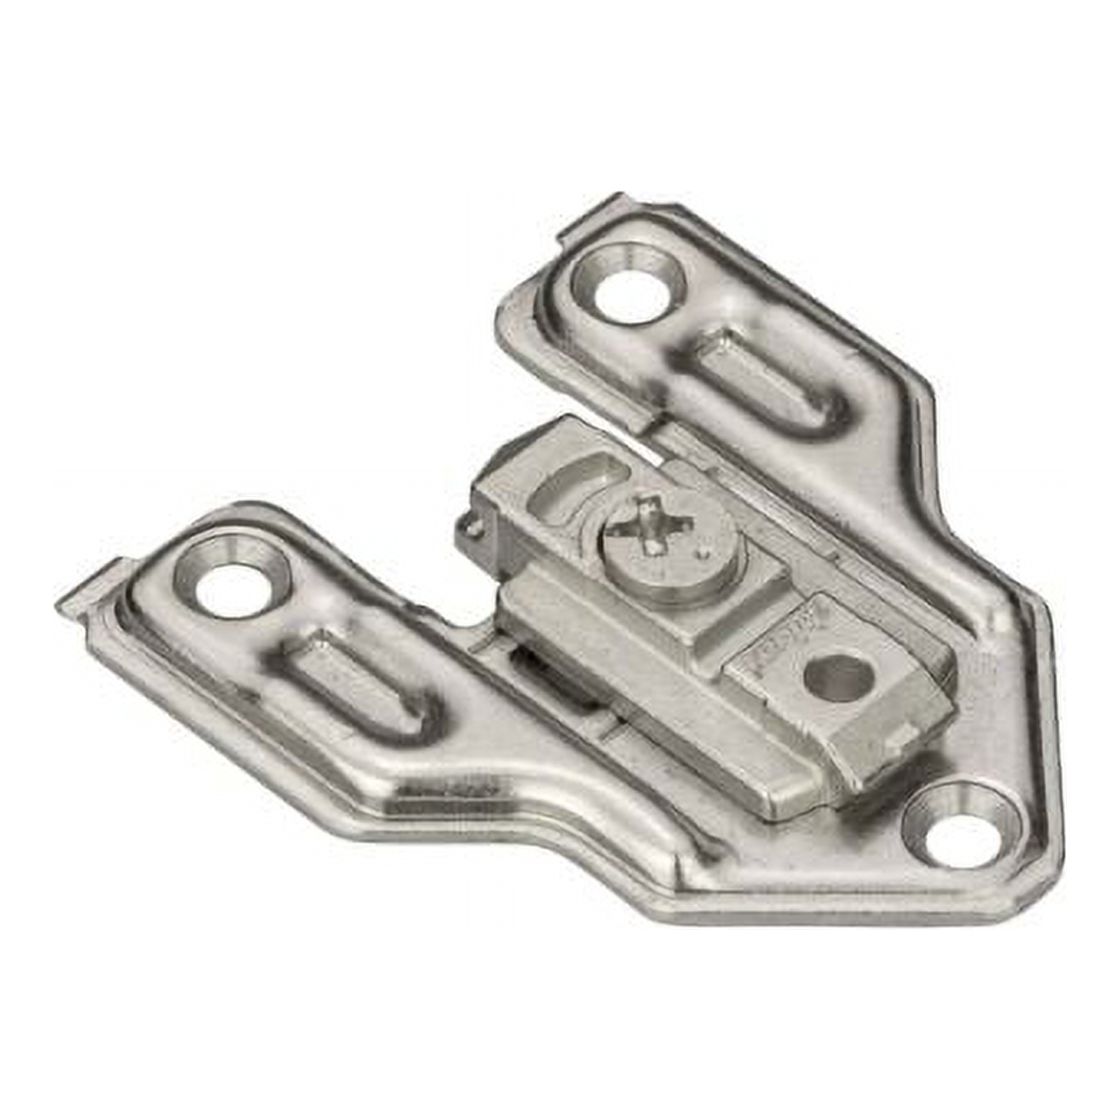 Blum 25-Pack Clip Face Frame Screw-on 0mm Mounting Plate, Nickel-Plated - image 1 of 3